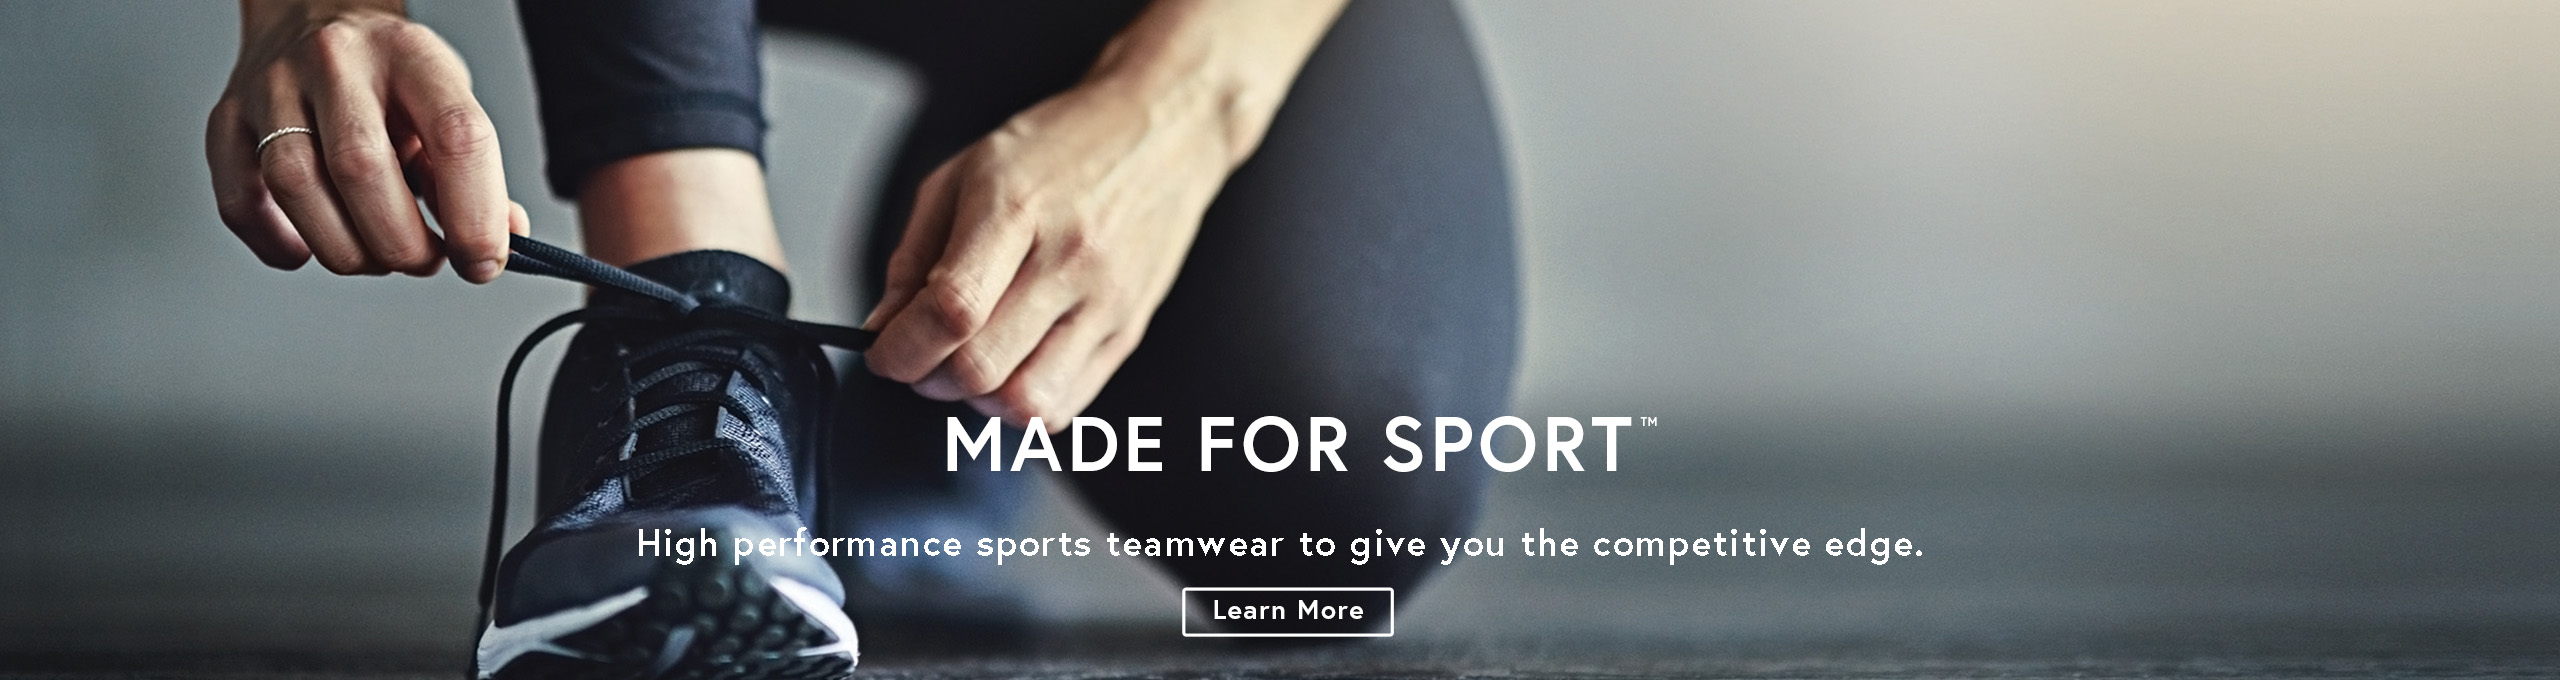 GFORCE - Made For Sport